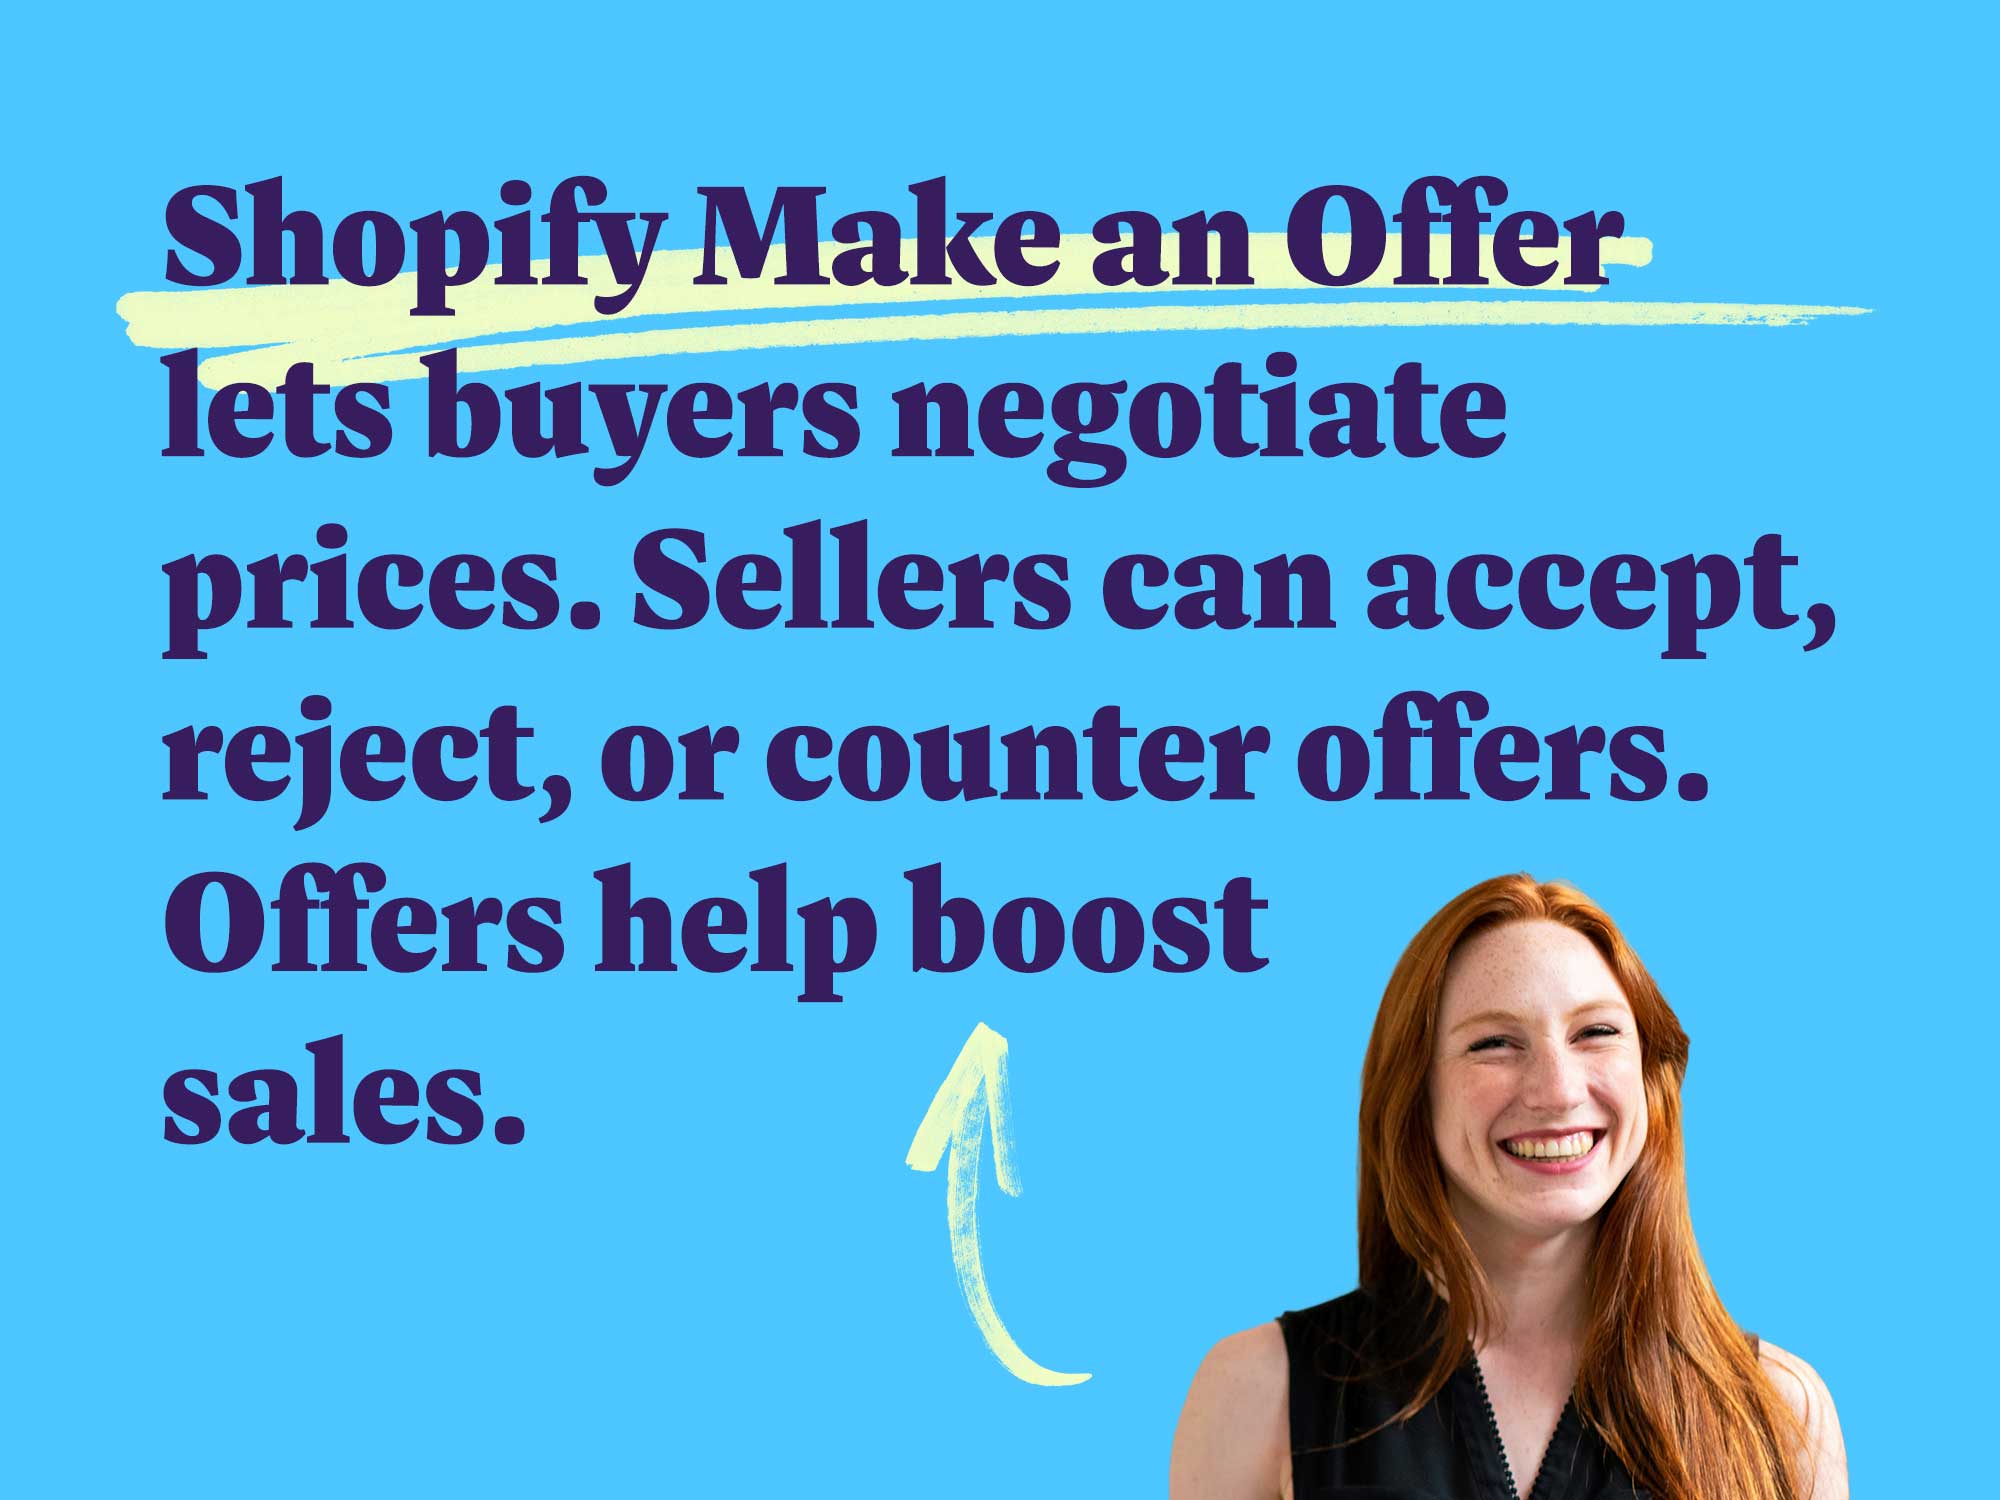 Shopify Make an Offer lets buyers negotiate prices. Sellers can accept, reject, or counter offers. Offers help boost sales.